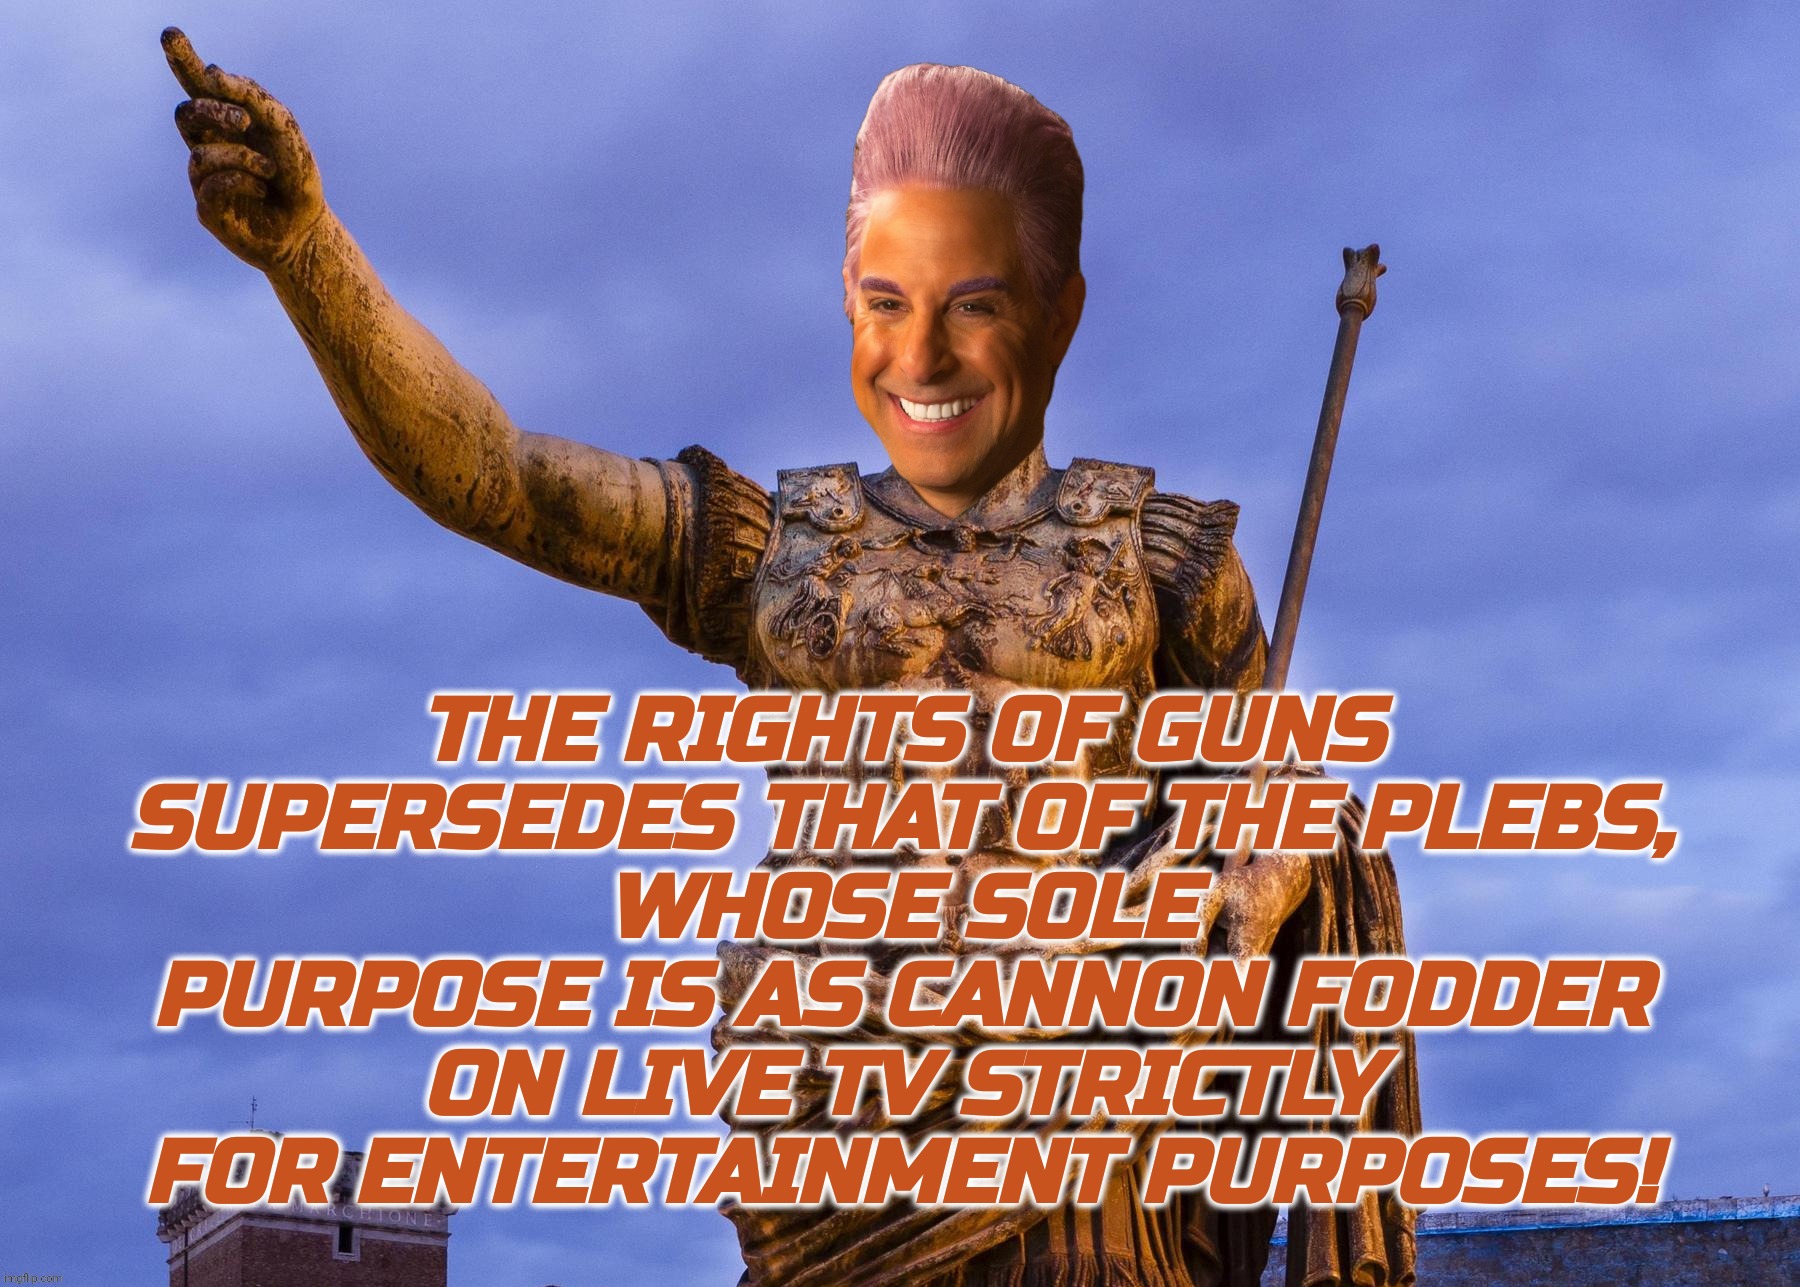 c | THE RIGHTS OF GUNS SUPERSEDES THAT OF THE PLEBS,
WHOSE SOLE PURPOSE IS AS CANNON FODDER ON LIVE TV STRICTLY FOR ENTERTAINMENT PURPOSES! | image tagged in c | made w/ Imgflip meme maker